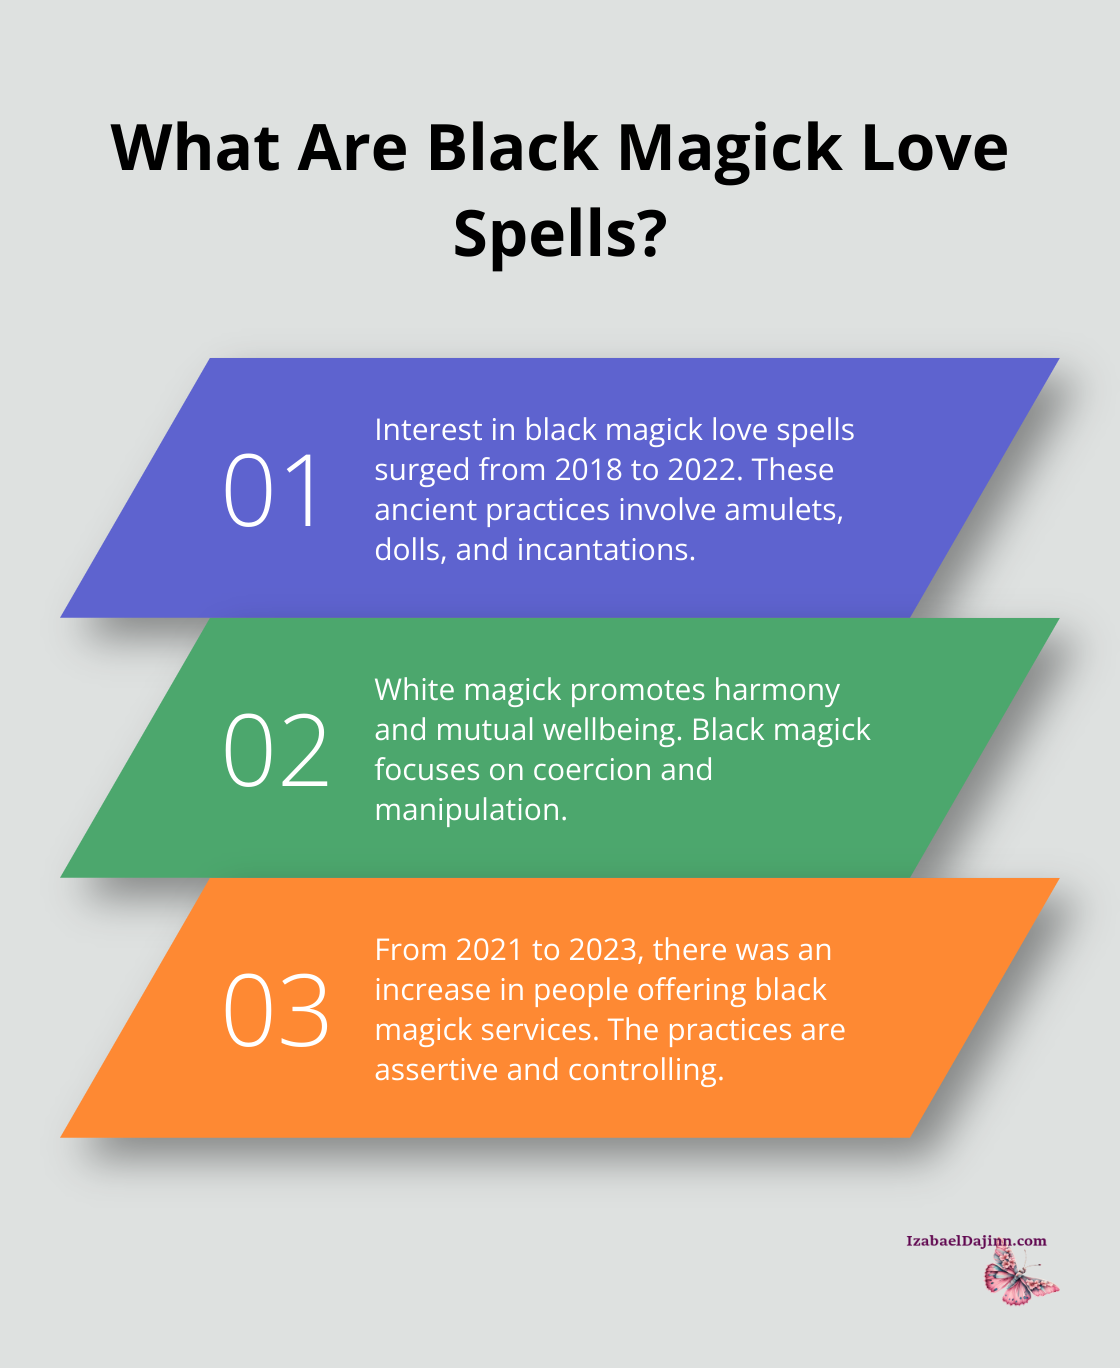 Fact - What Are Black Magick Love Spells?